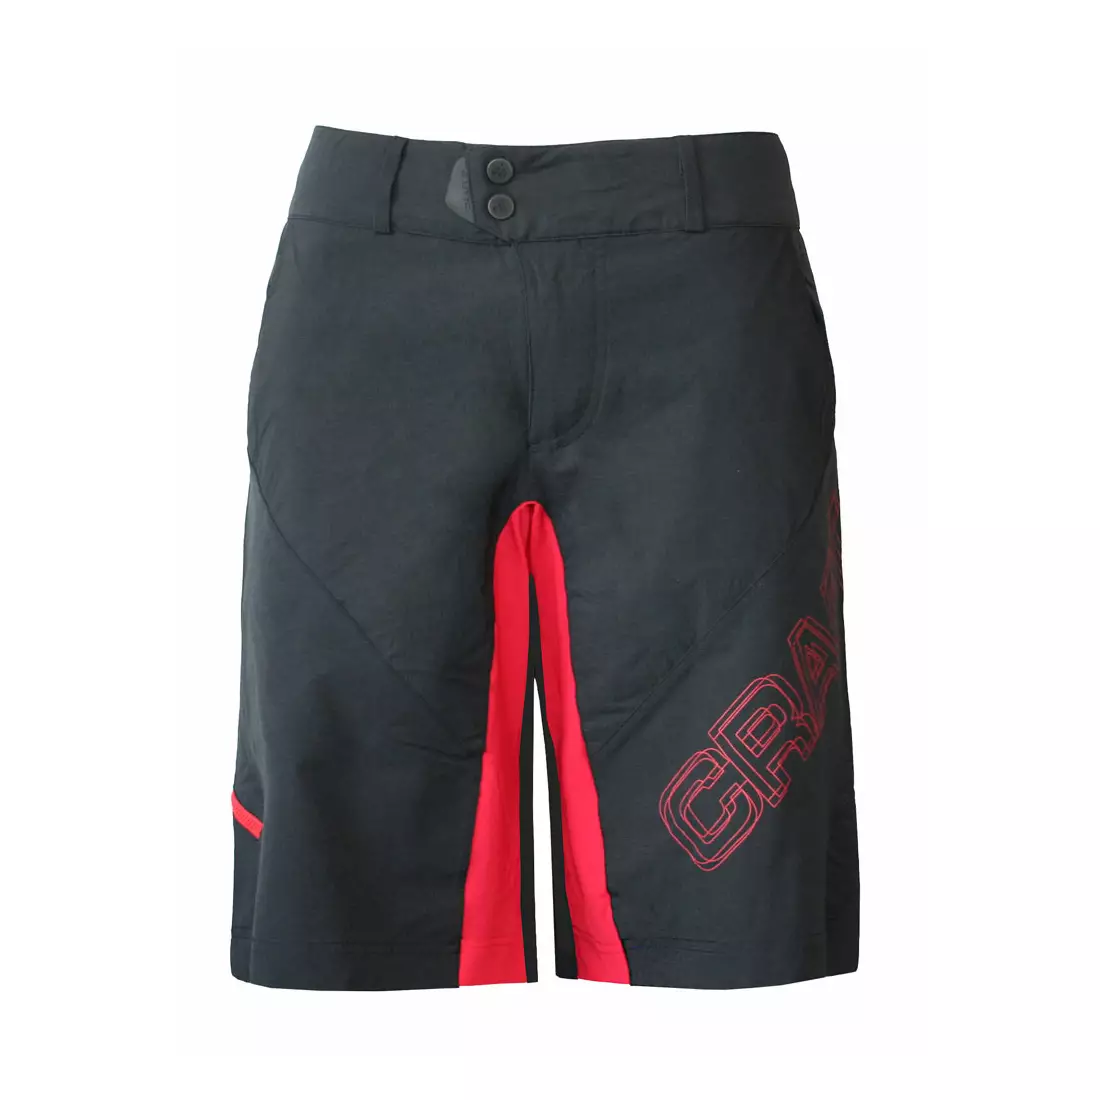 CRAFT ACTIVE BIKE - men's cycling shorts 1900700-9430, color: black and red